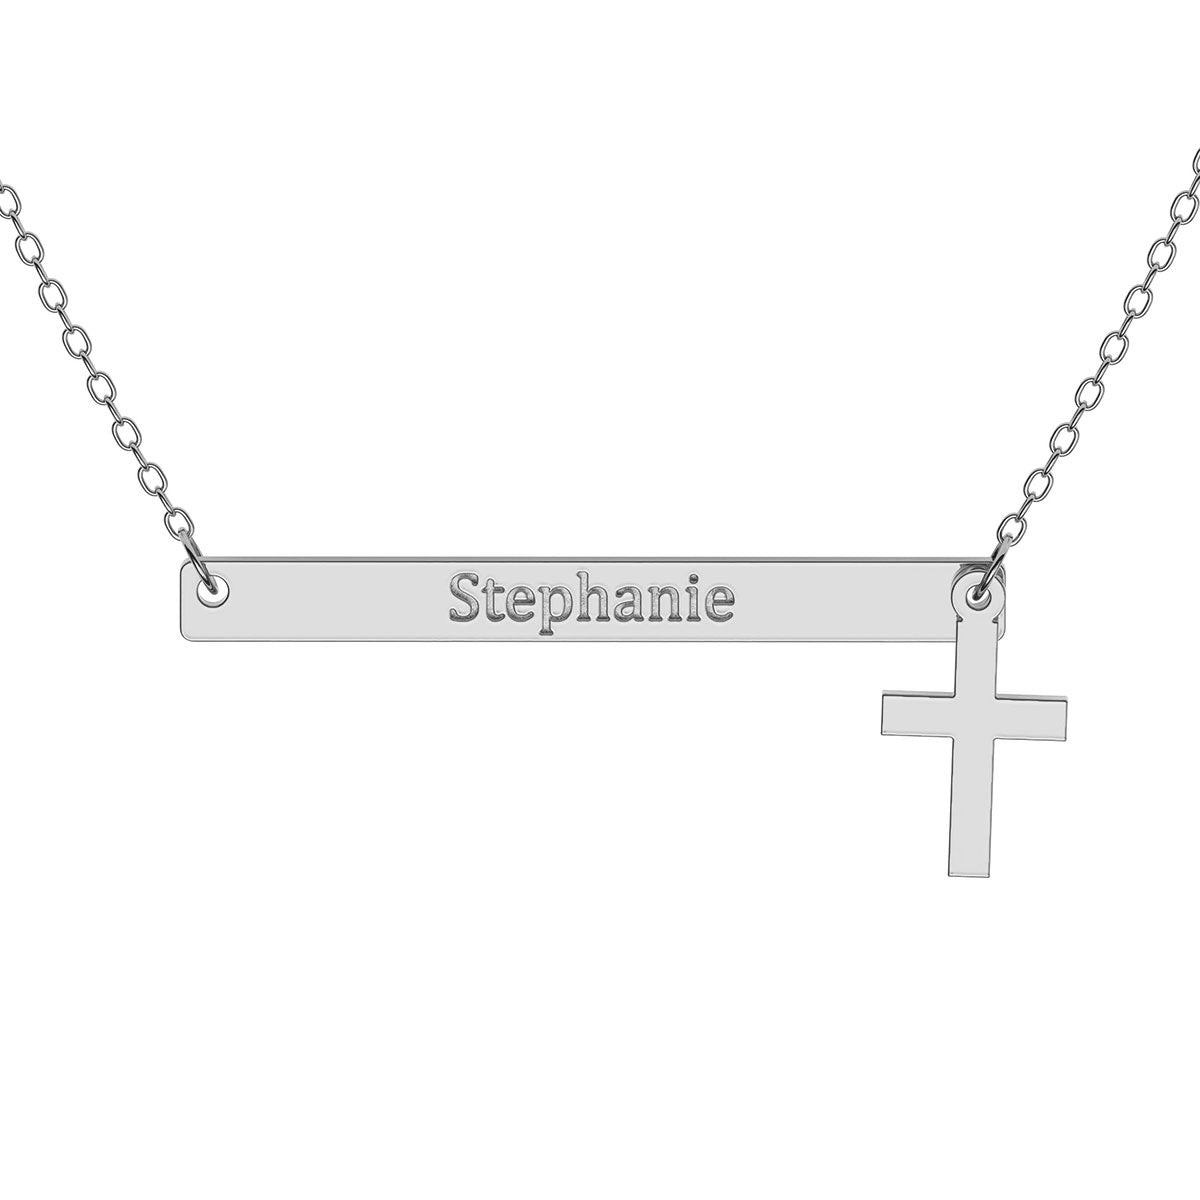 Narrow Horizontal Bar Necklace with Engraving and Cross Charm